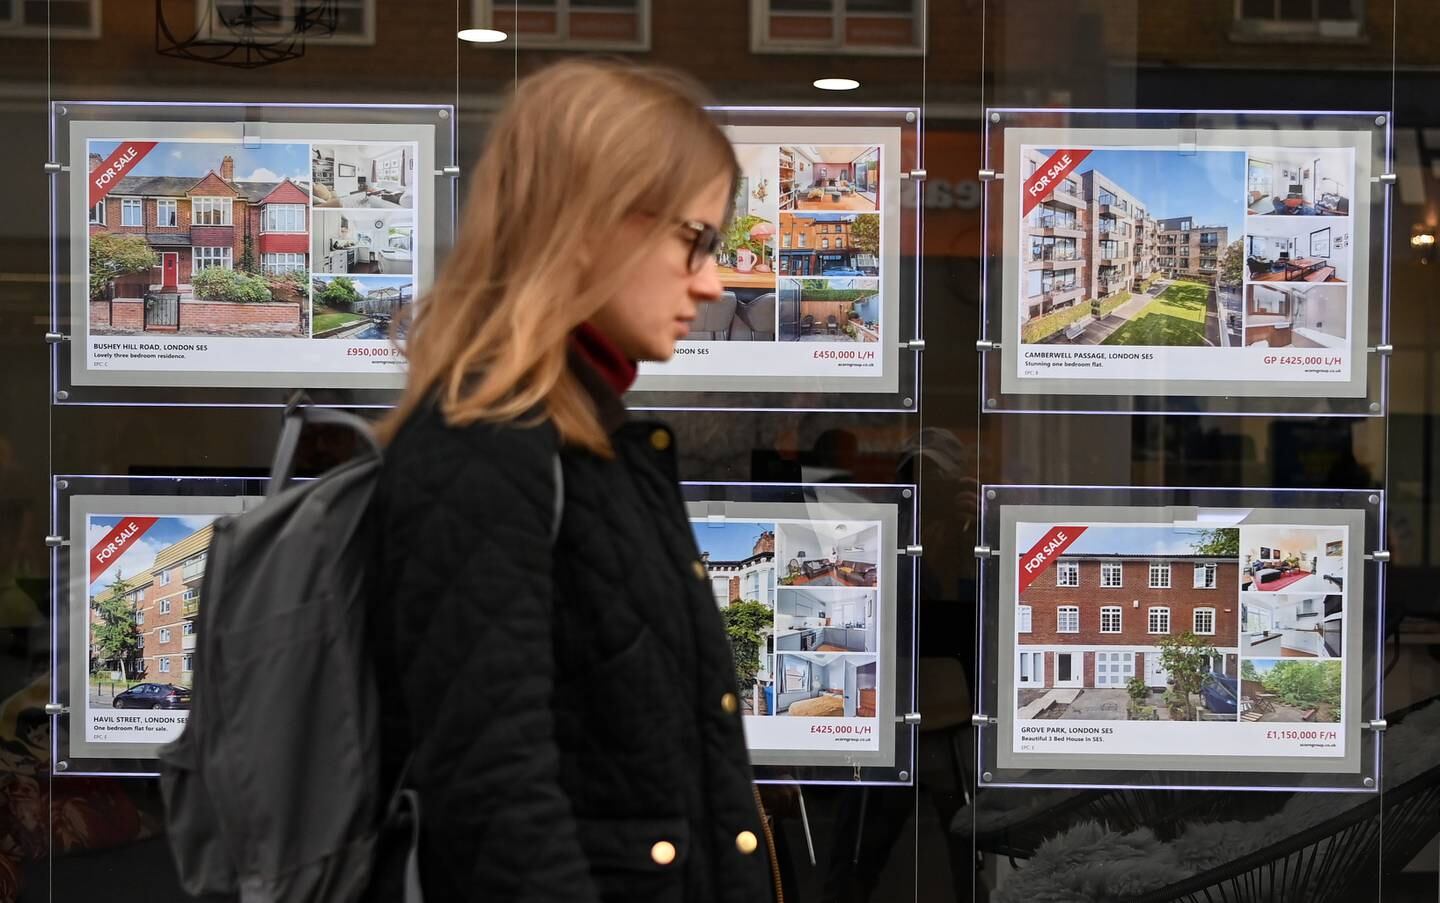 According to Nationwide's house price index, the average house price fell by about 1. 4 percent month on month in November, the biggest fall since June 2020, after the mini budget that led mortgage lenders  to increase rates dramatically. EPA